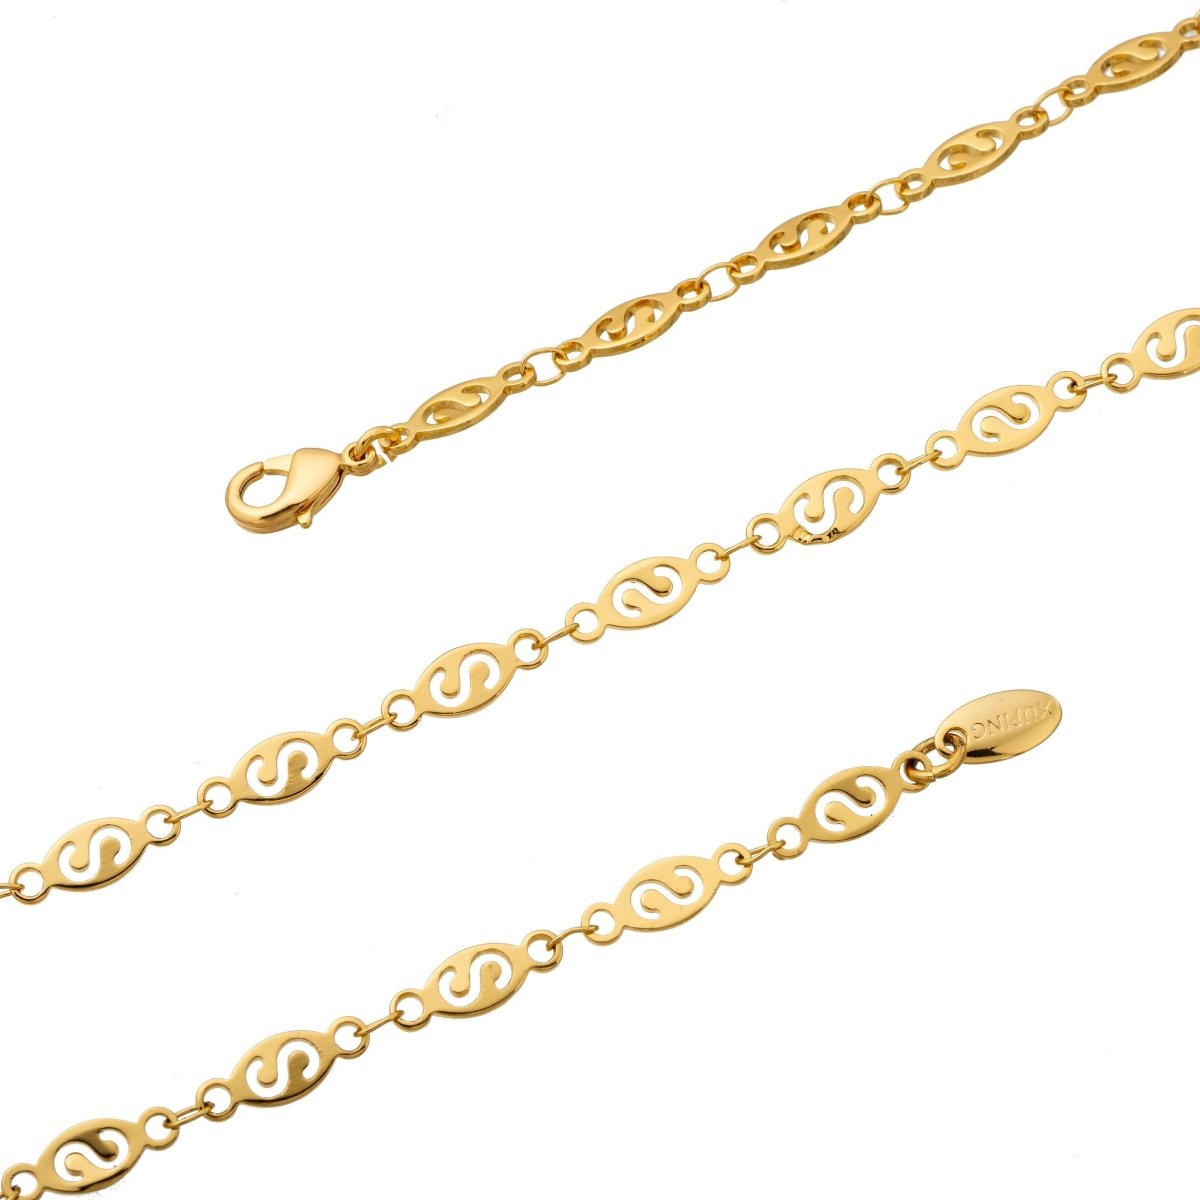 24K Gold Filled Necklace, 17.5 inch Layering Designed Chain Necklace, 5mm Designed Necklace w/ Lobster Clasps | CN-171 Clearance Pricing - DLUXCA